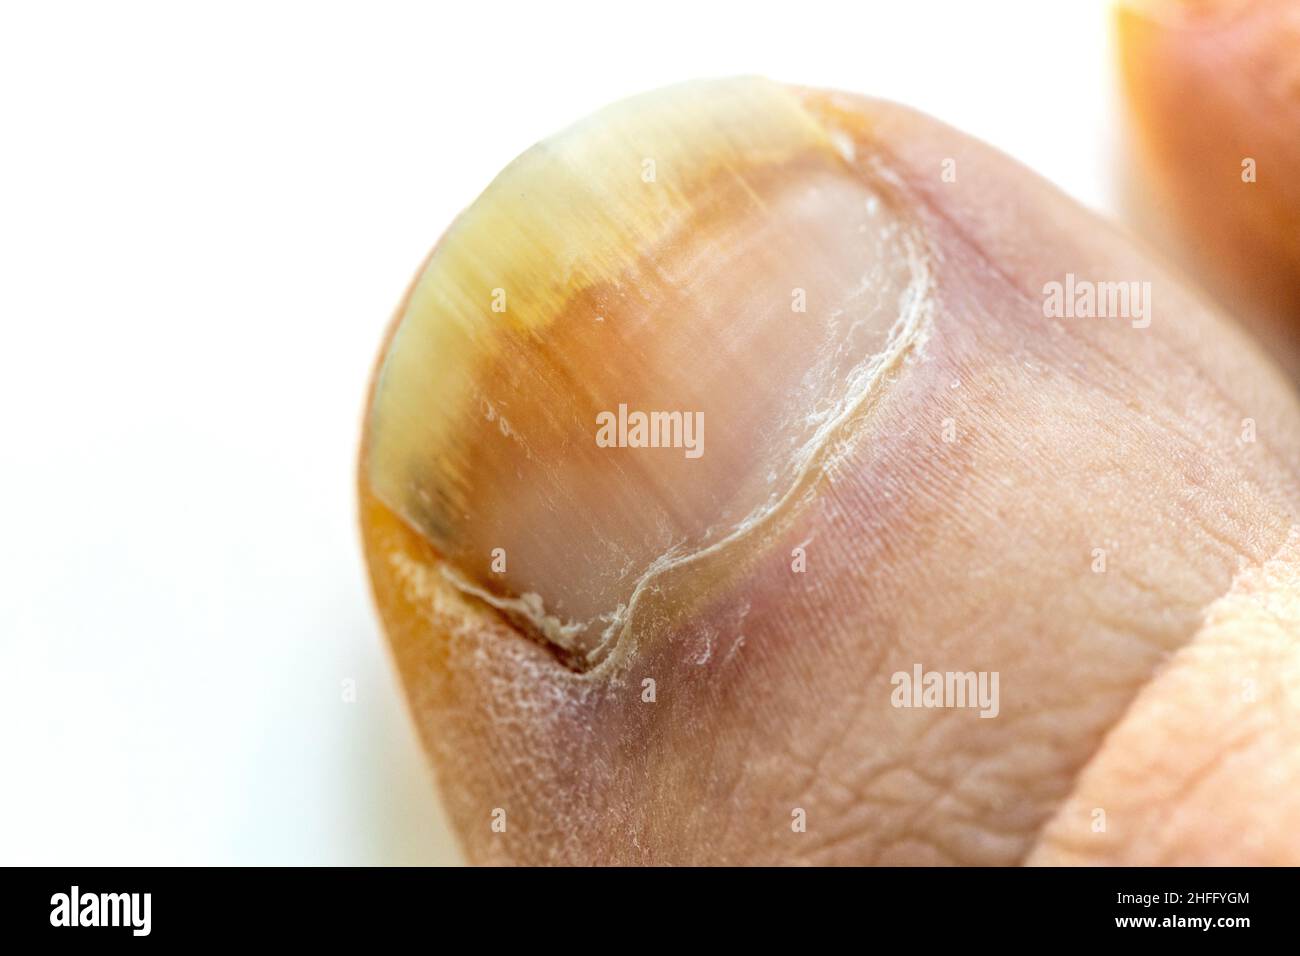 onychomycosis, The initial stage of mycosis. Big toe infected with fungal bacteria, Close up, White background Stock Photo